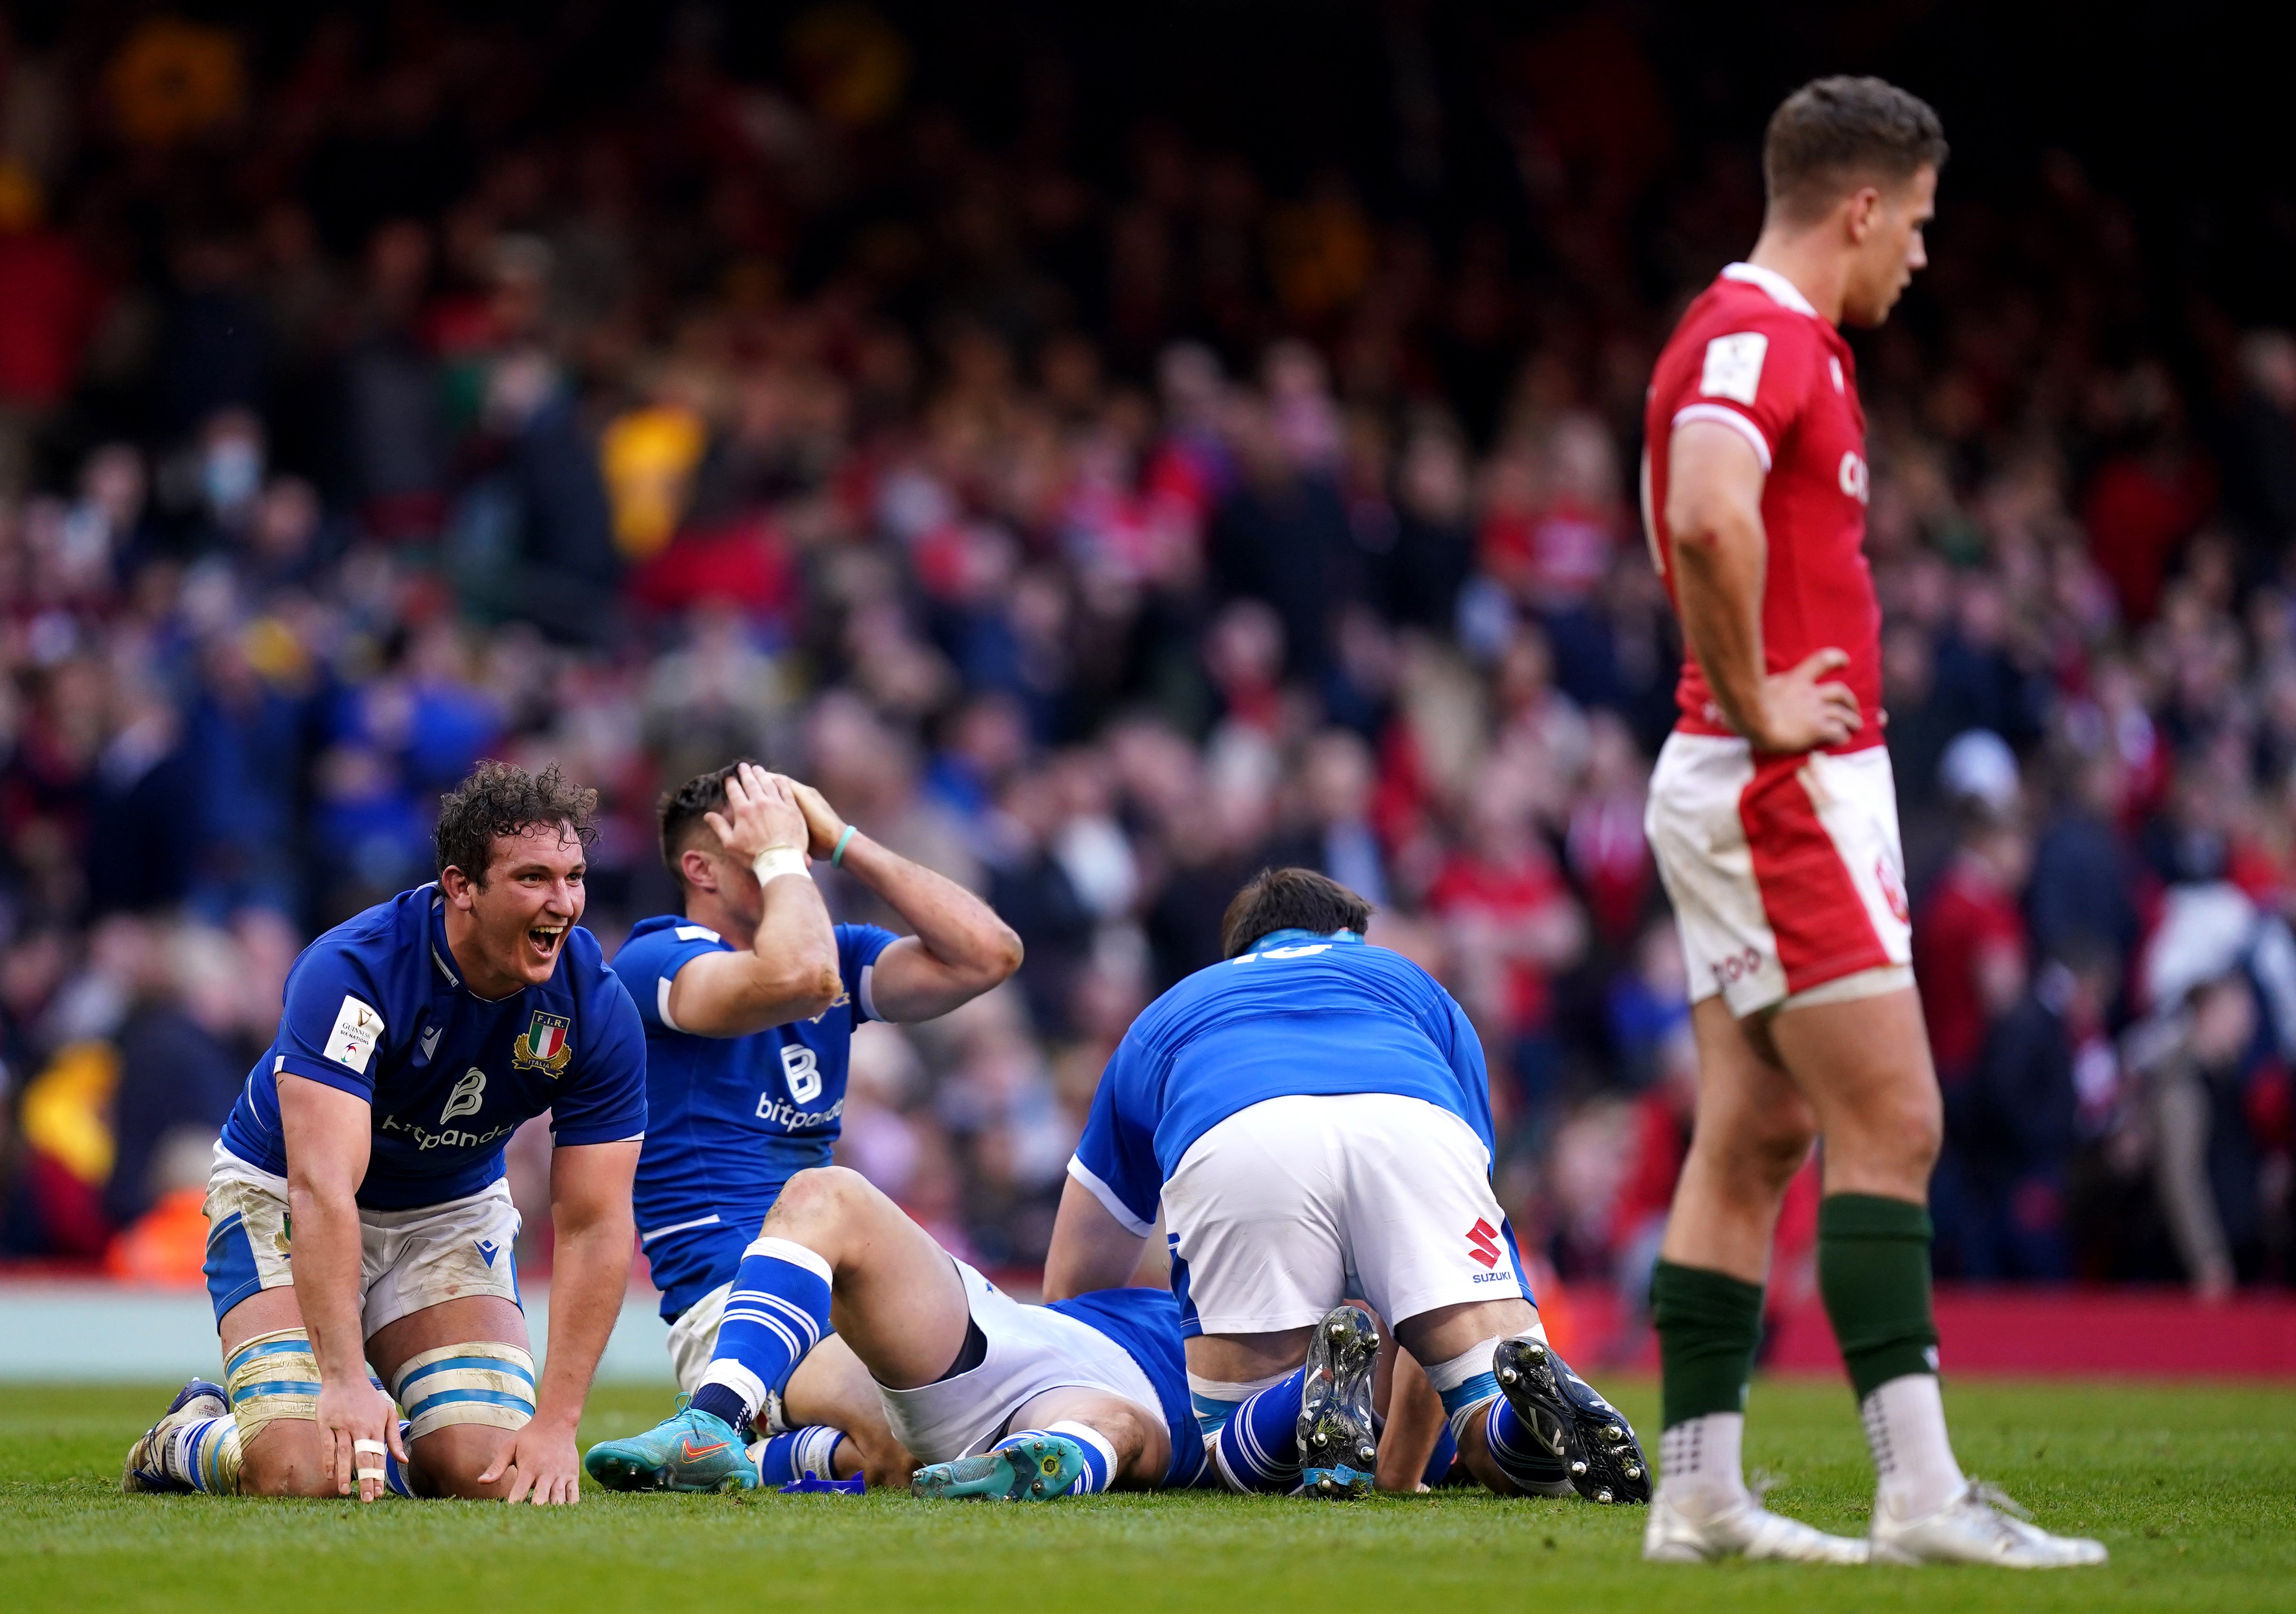 Michele Lamaro guided Italy to their first Six Nations win since 2015 (Mike Egerton/PA)